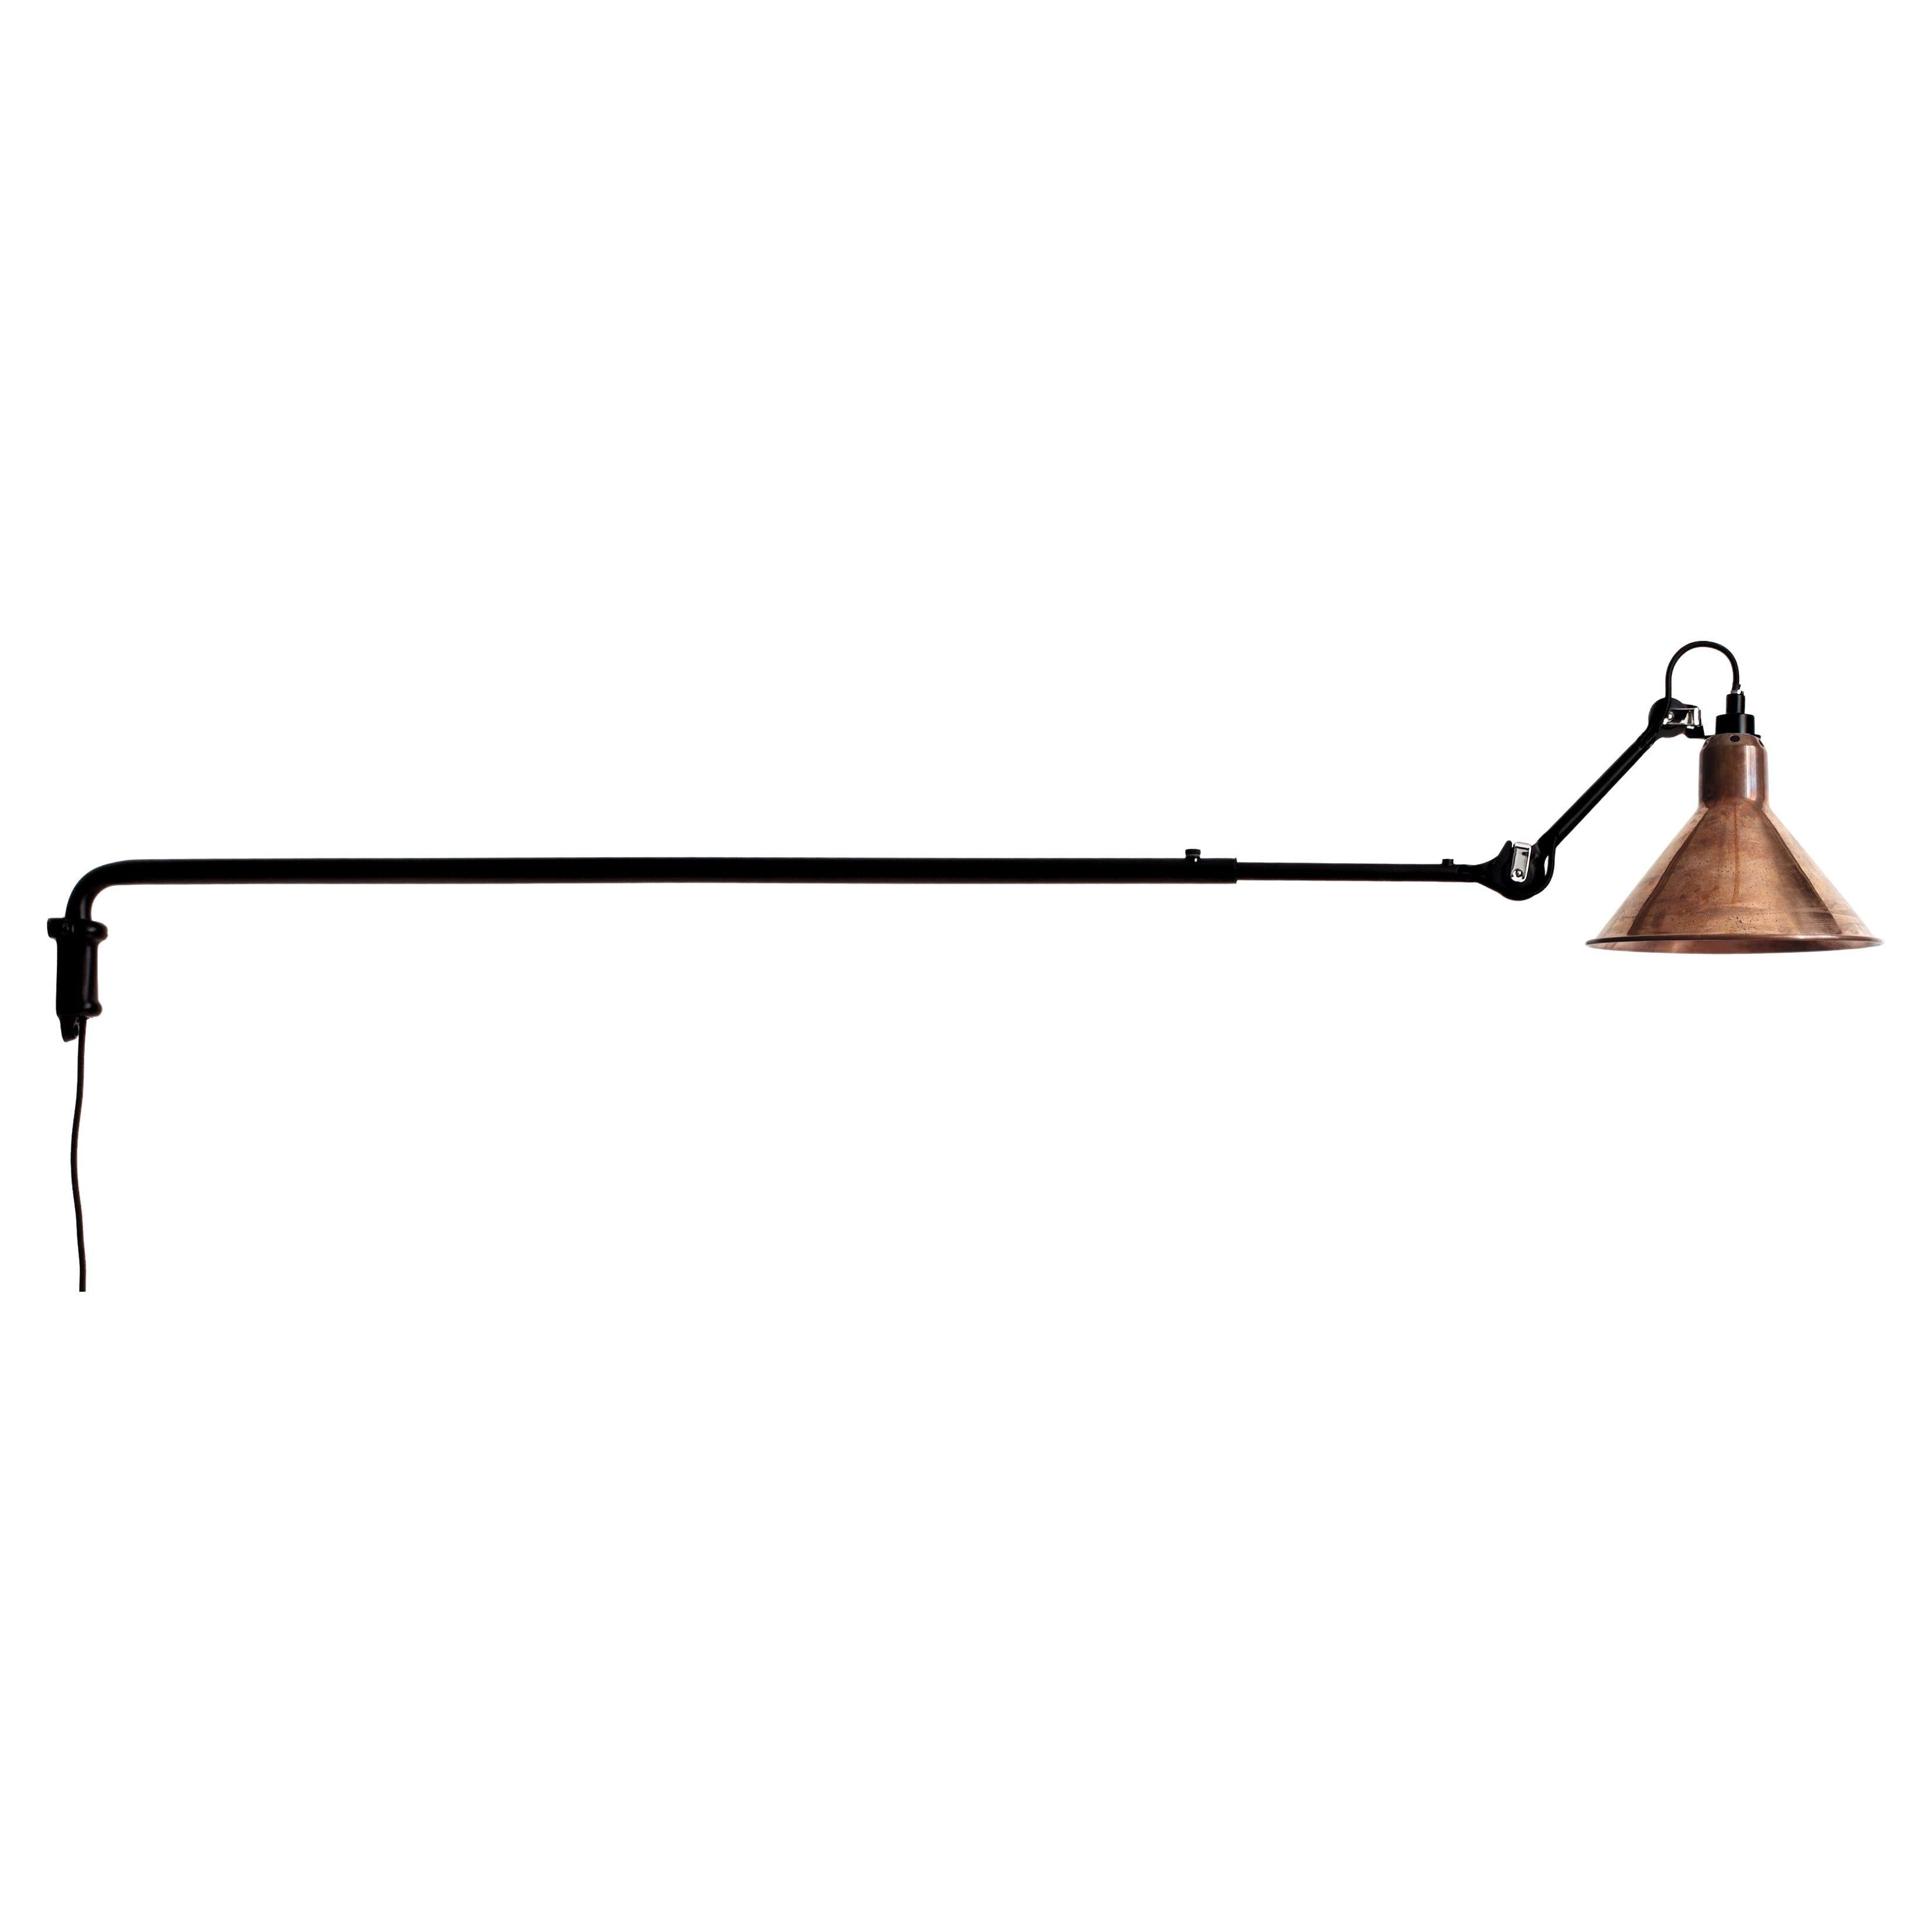 DCW Editions La Lampe Gras N°213 Wall Lamp in Black Arm and Raw Copper Shade